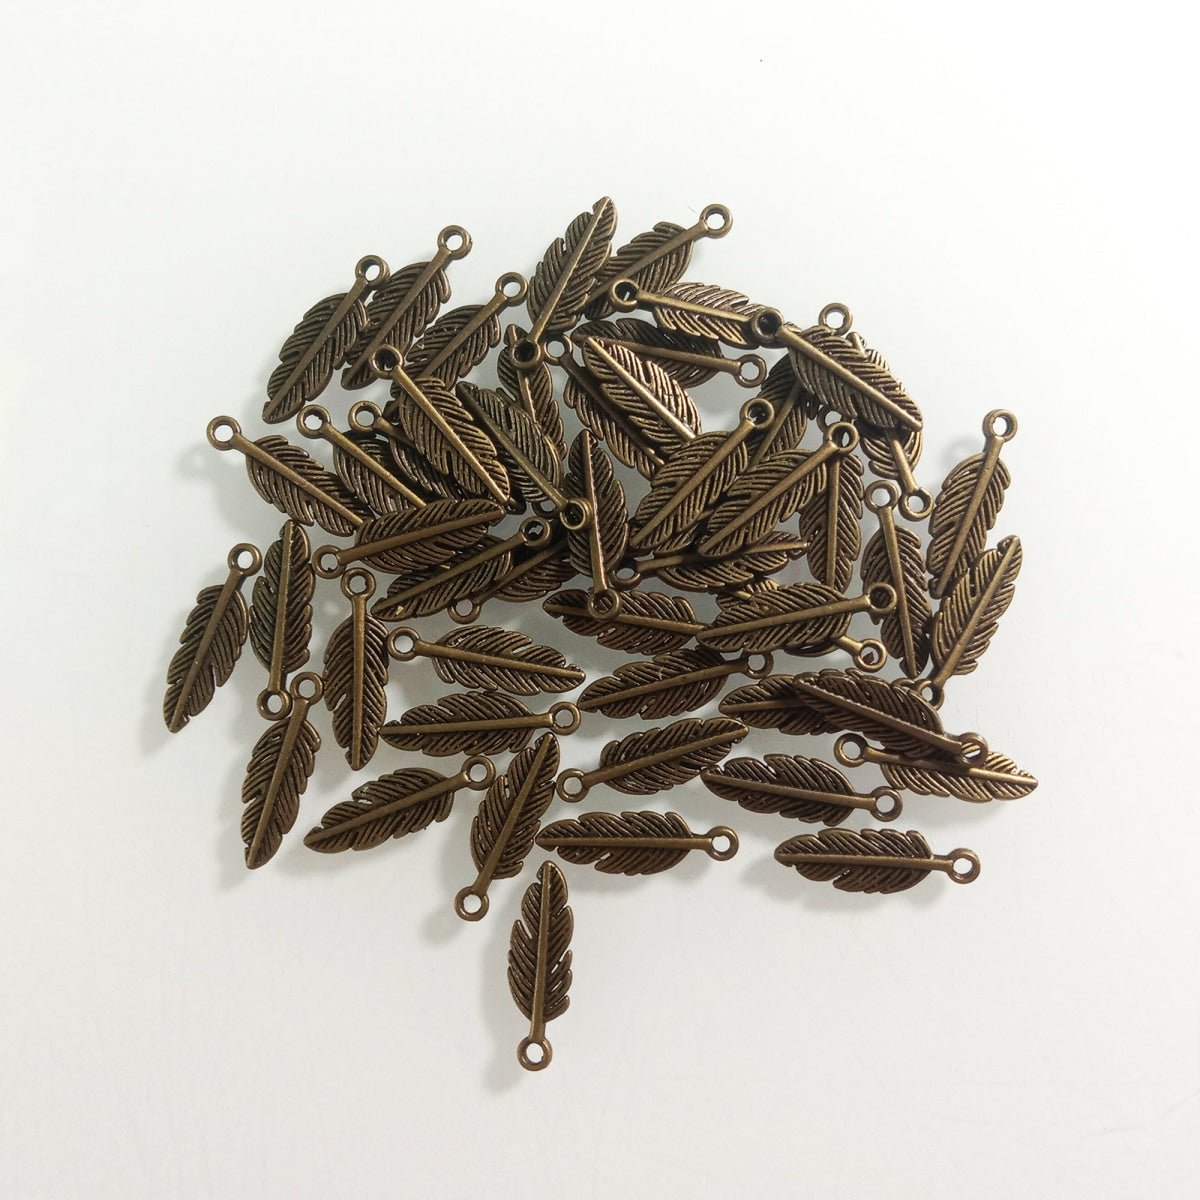 40pcs Feather Charms Pendant DIY Metal Jewellery Making Antique Silver Gold Bronze Colour - Bronze - - Asia Sell